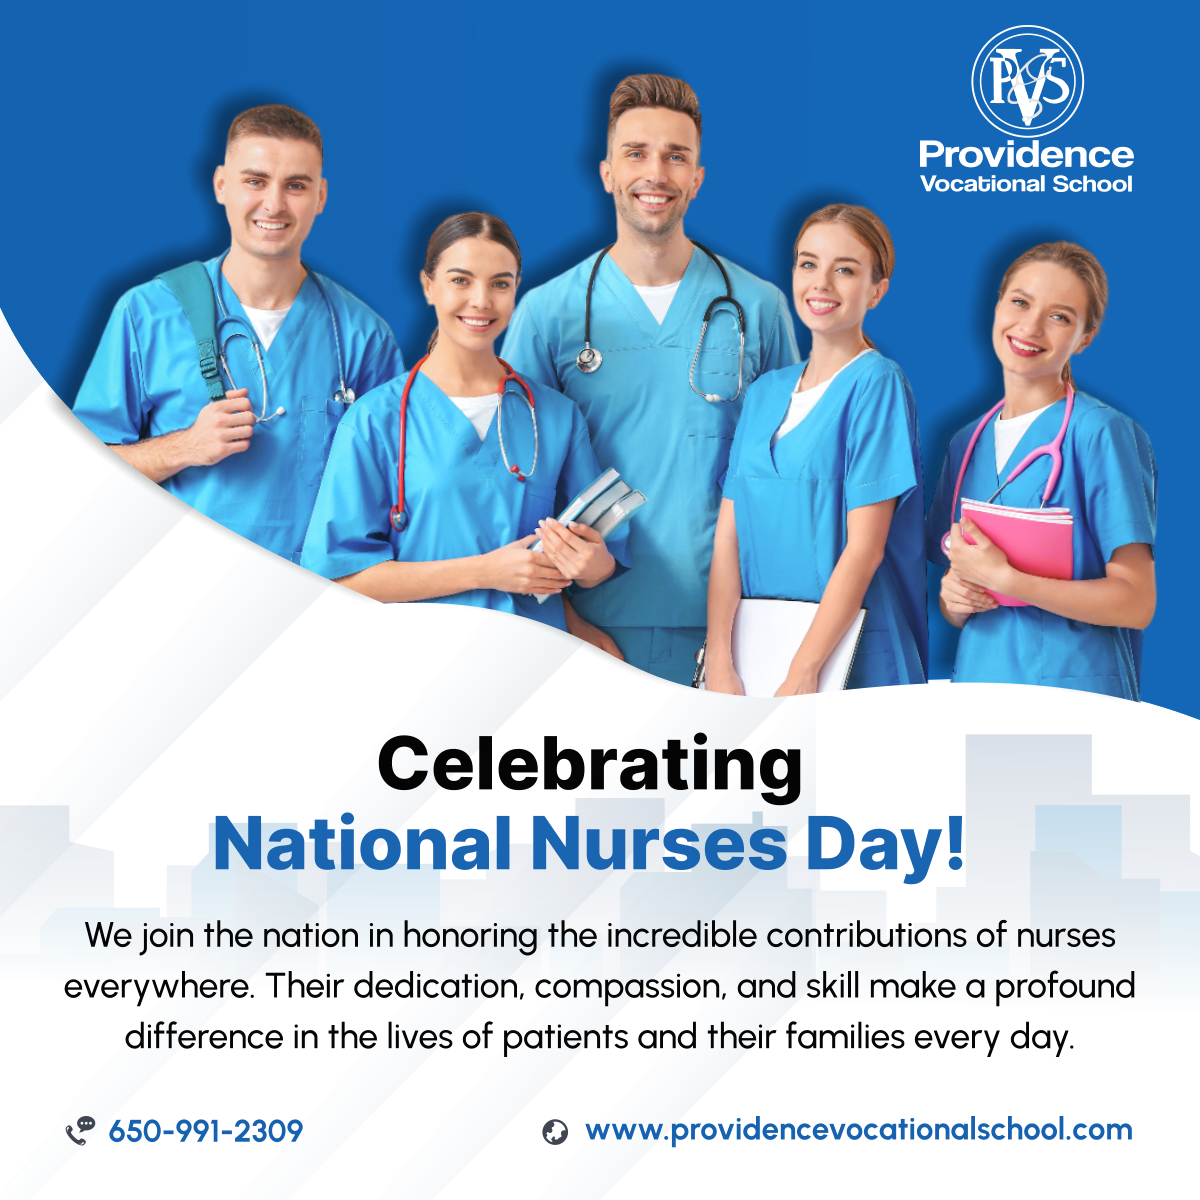 To all the superheroes in scrubs making a difference in the world, we salute you! Happy National Nurses Day! Thank you for all that you do! 

#NationalNursesDay #VocationalSchool #DalyCityCA